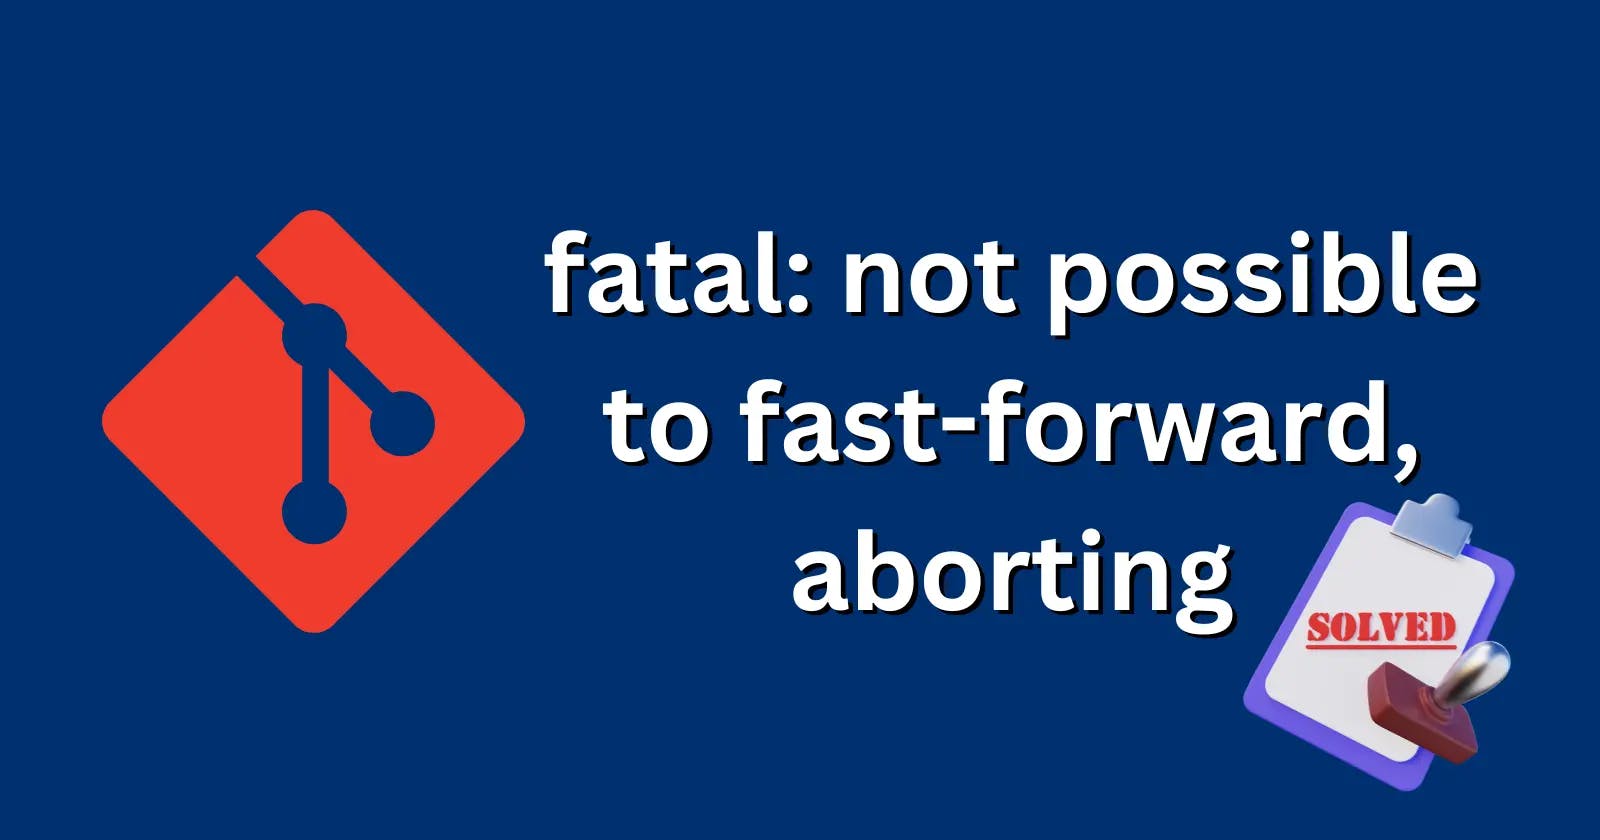 fatal: not possible to fast-forward, aborting Error solution